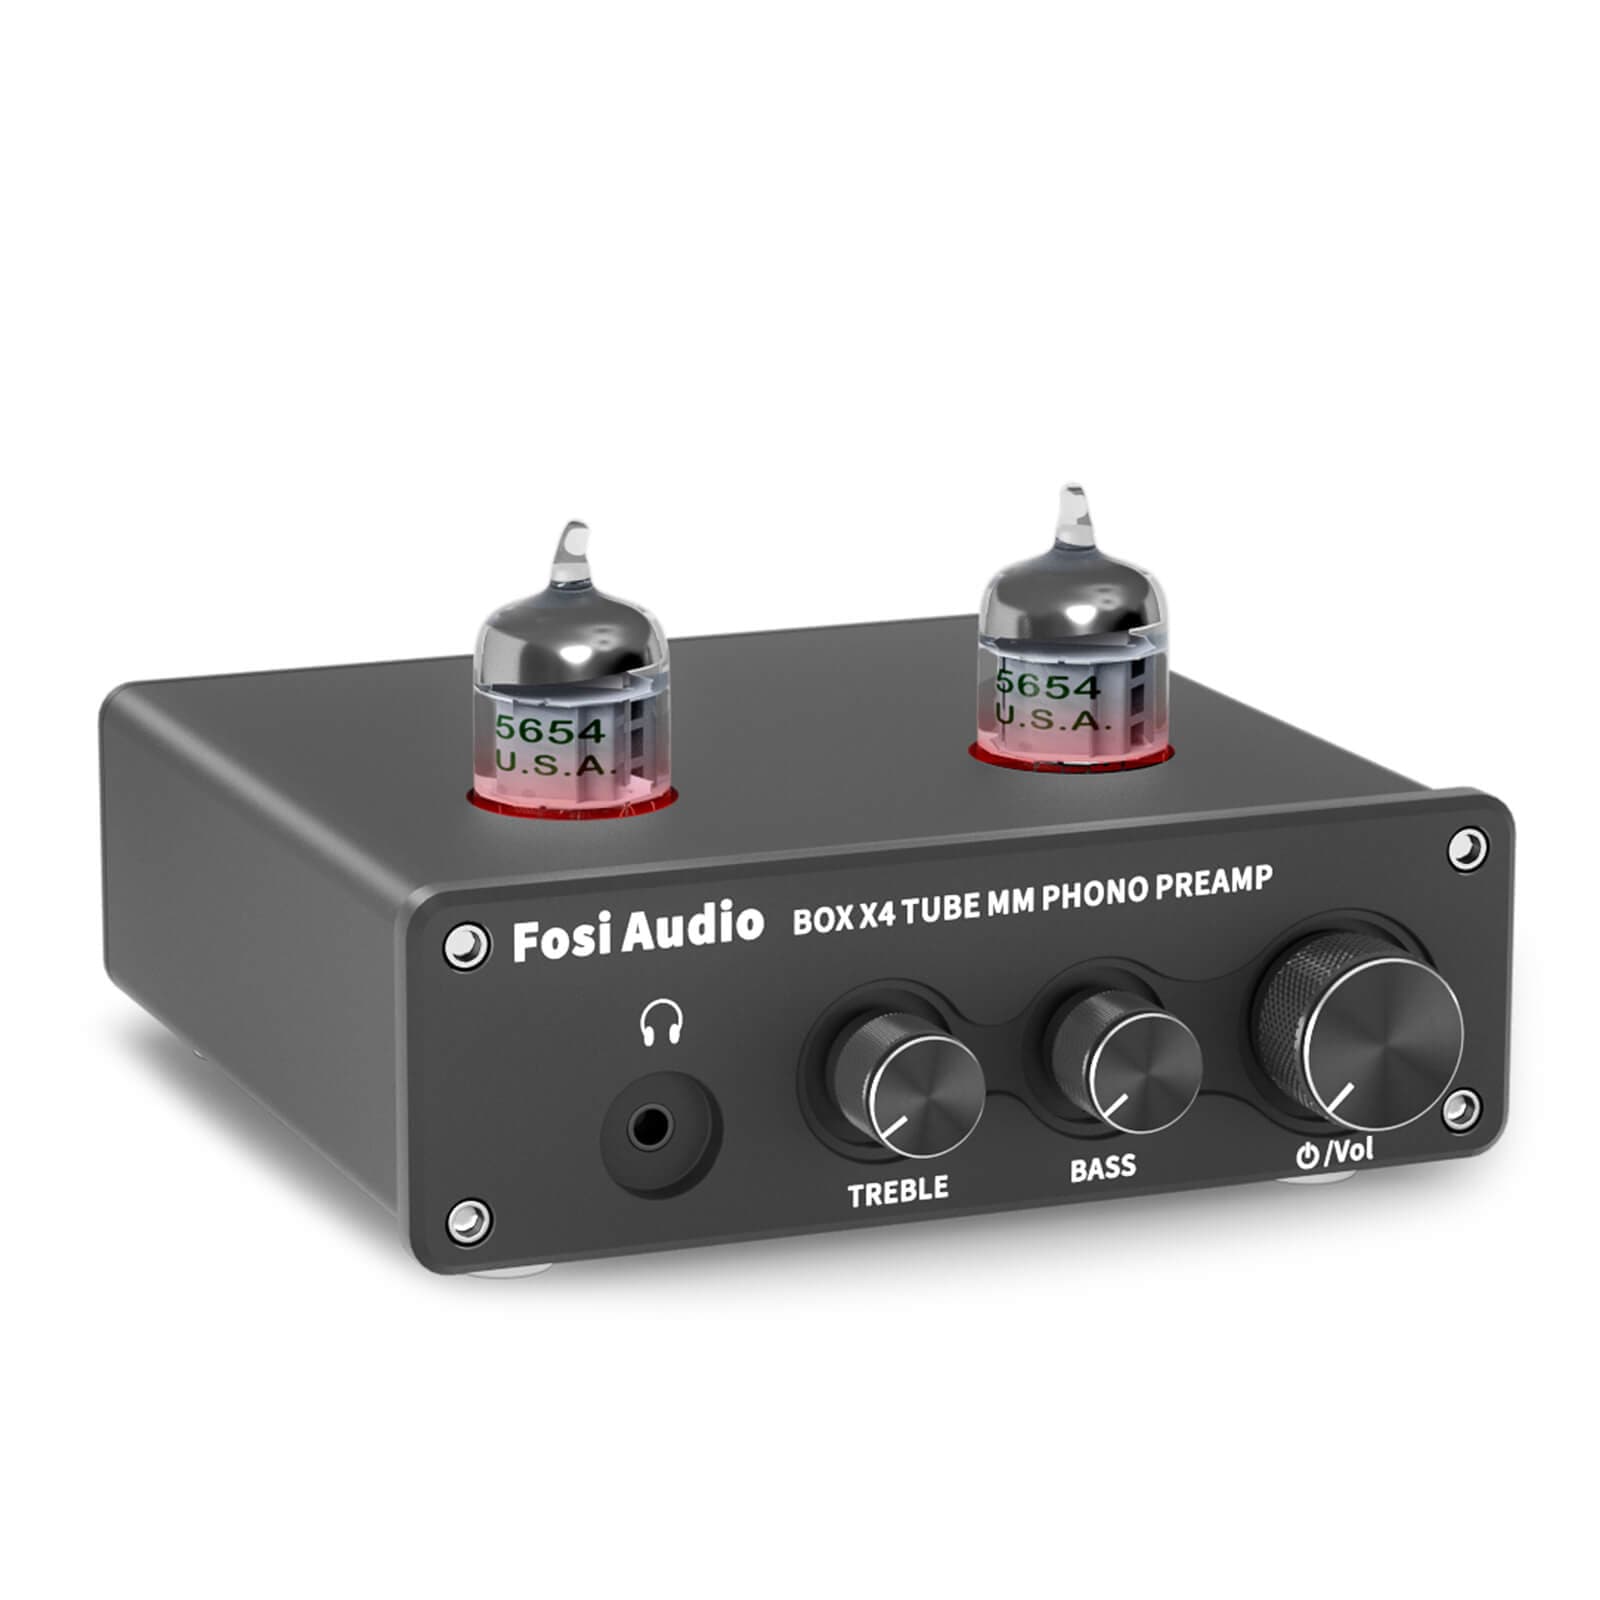 Phono Preamp & Headphone Amplifier with JAN 5654W Vacuum Tubes for MM Turntable Phonograph Preamplifier for Record Player with Volume Bass Treble Control Hi-Fi Pre Amp Fosi Audio Box X4